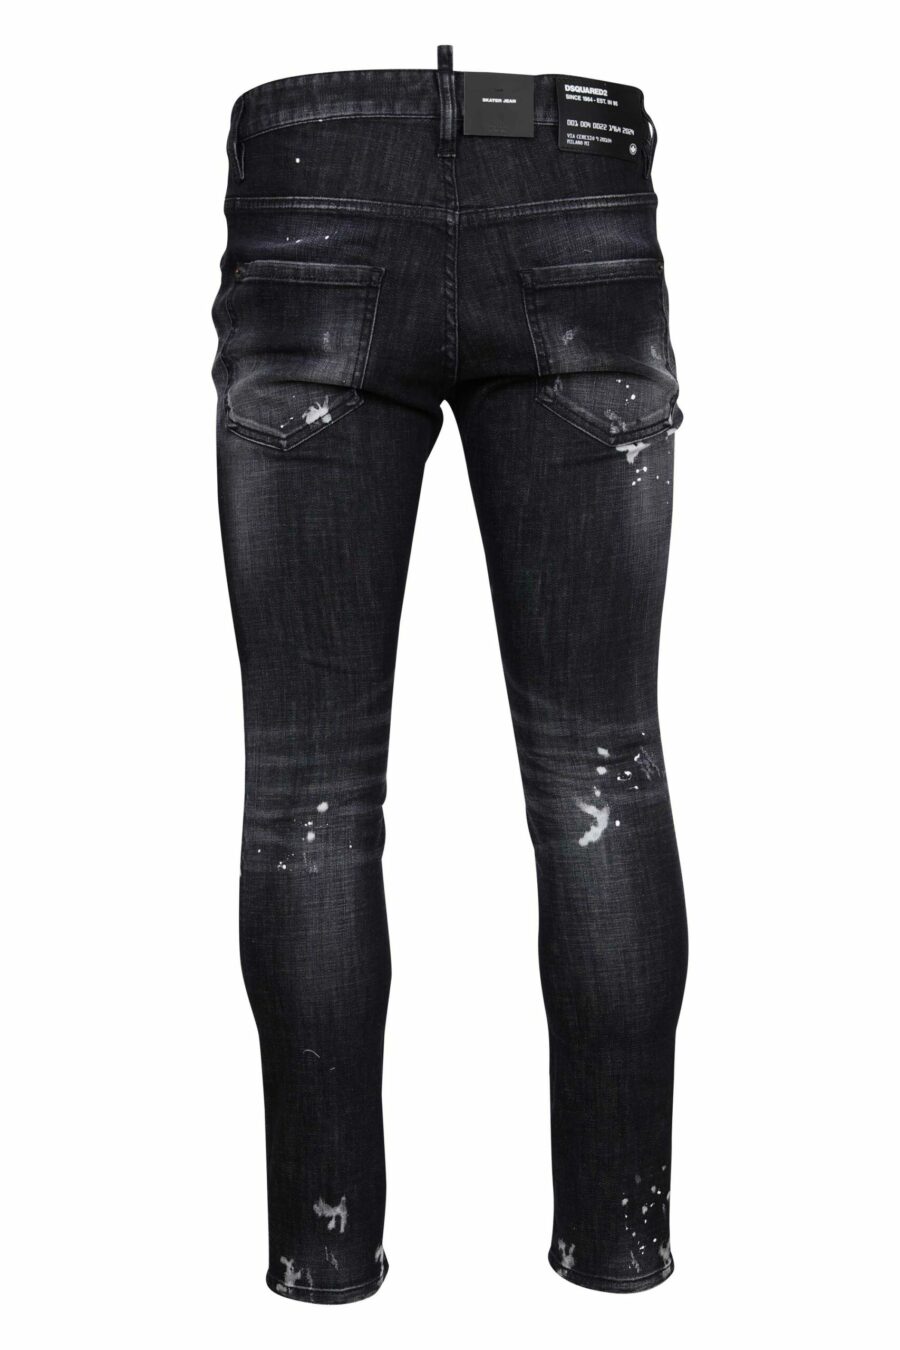 Black "skater jean" trousers with rips and semi-worn - 8054148300746 1 scaled